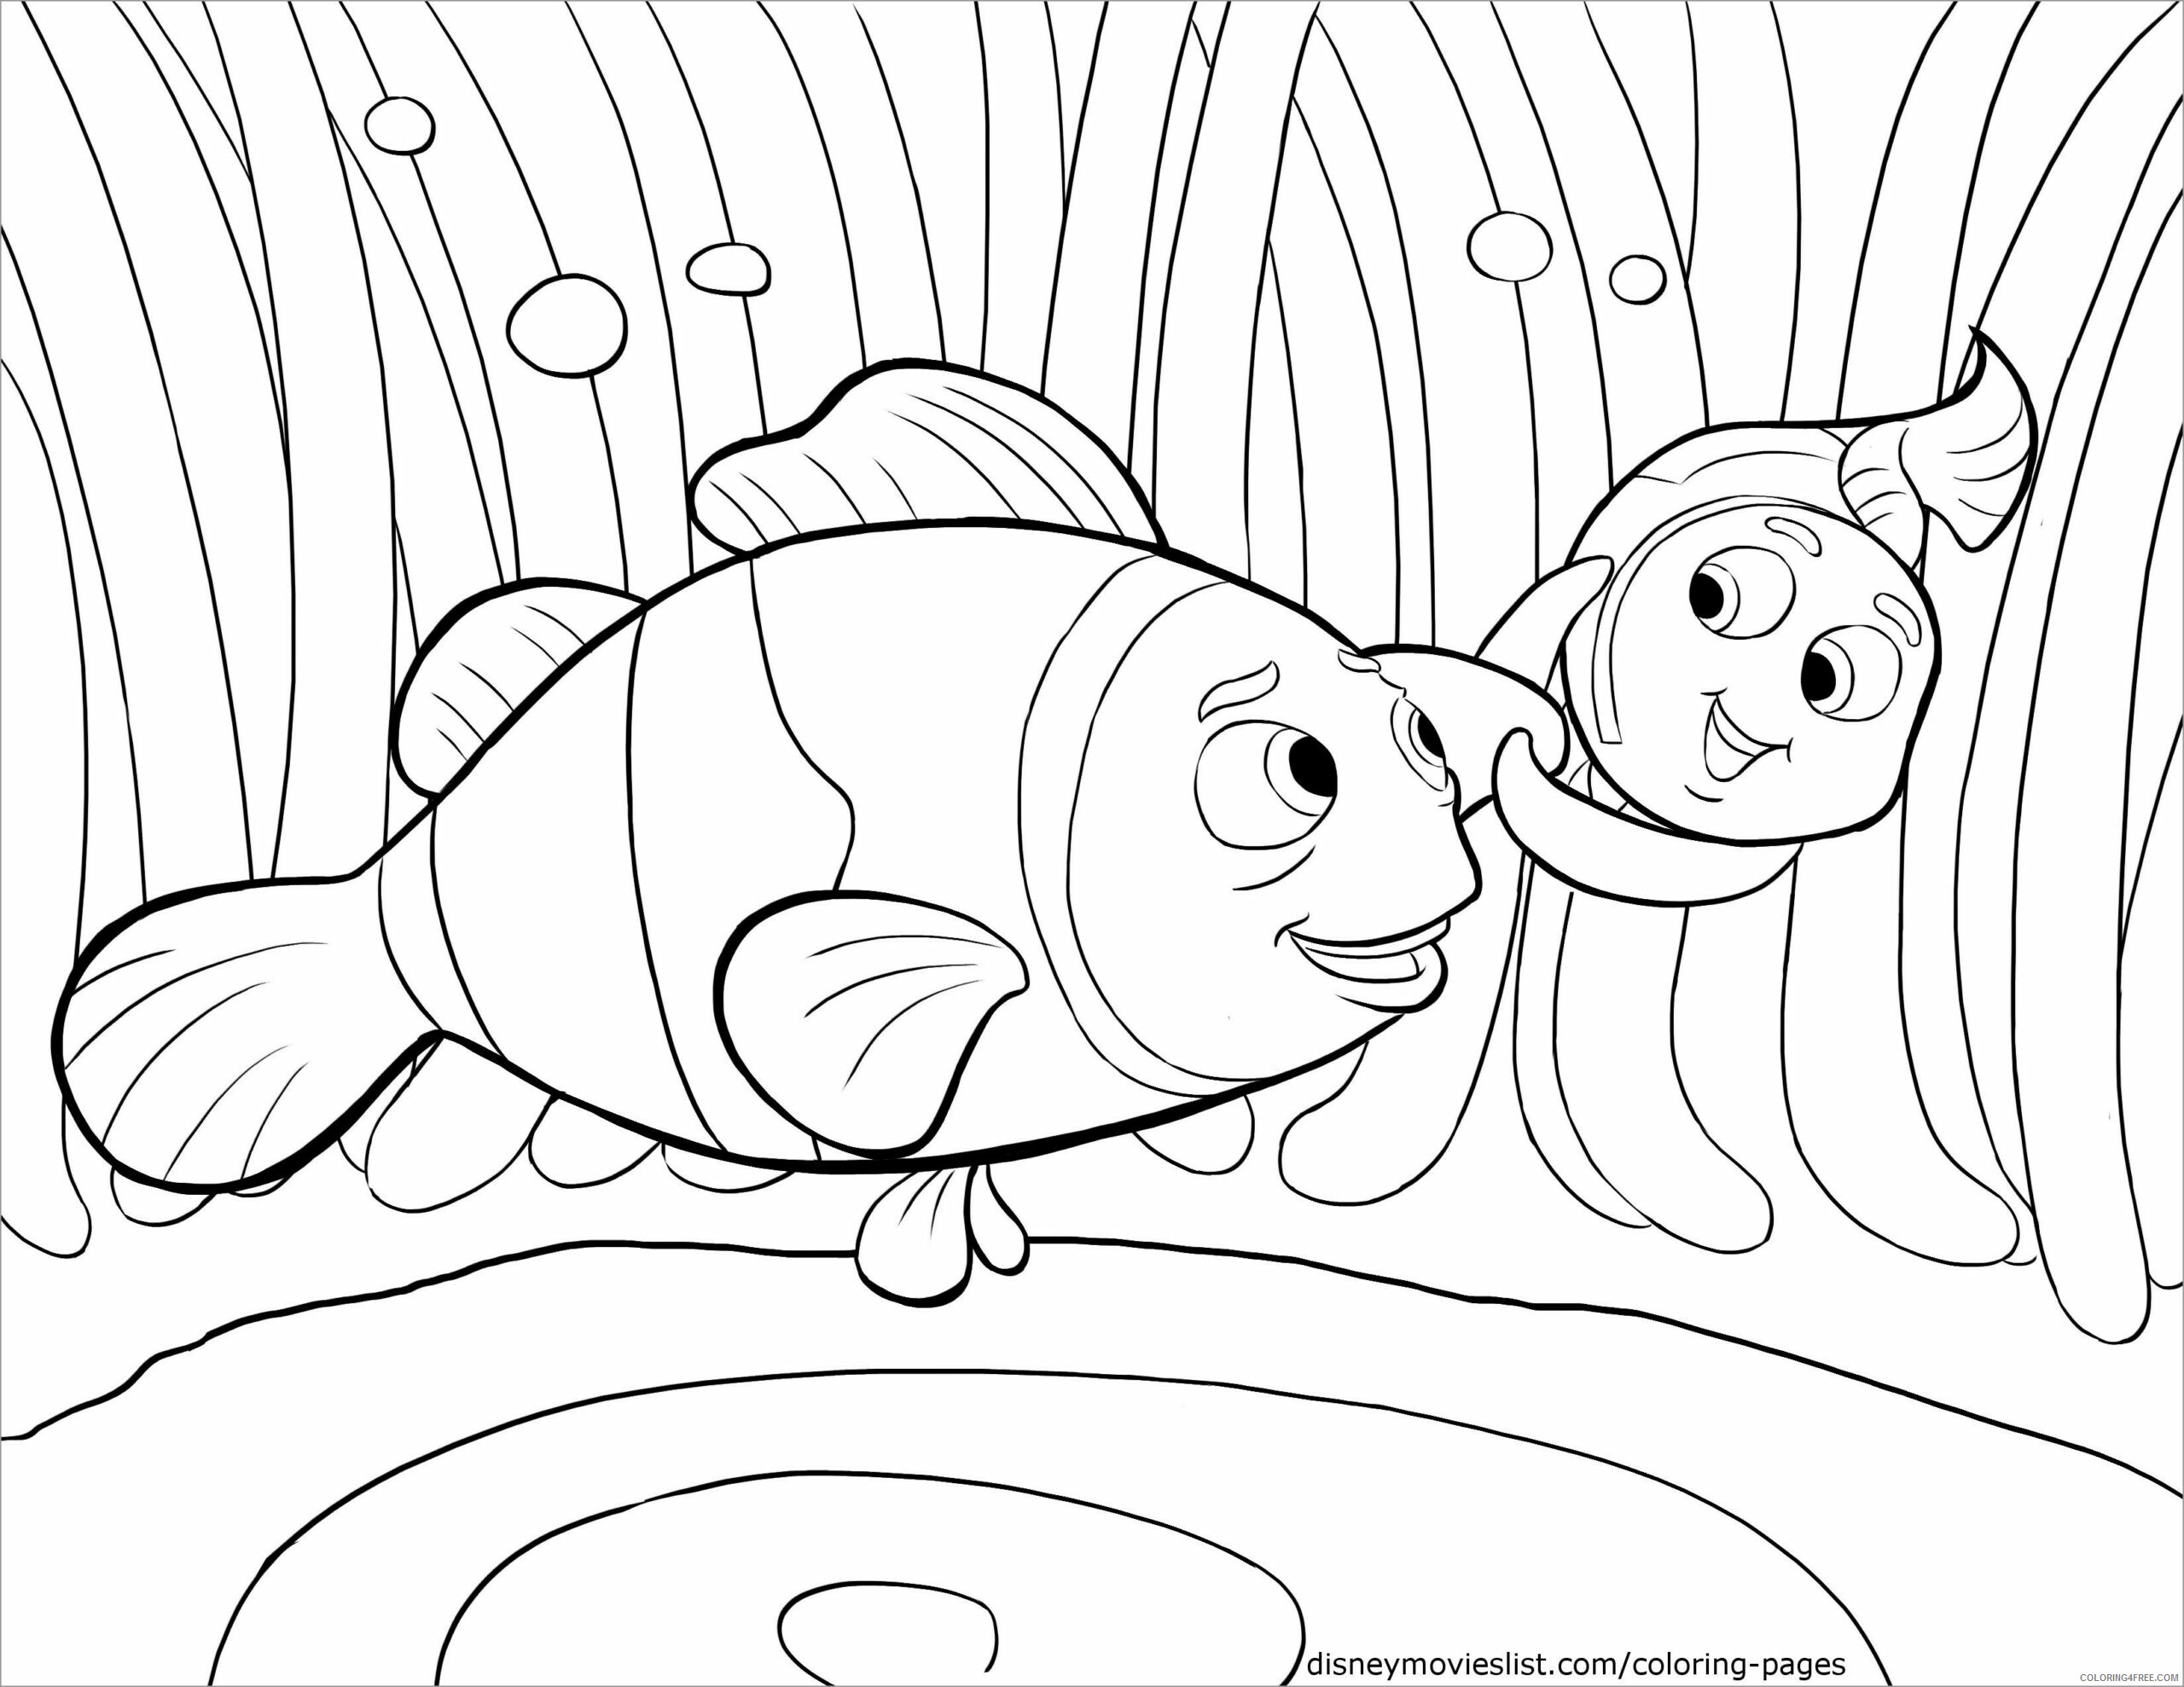 Finding Nemo Coloring Pages TV Film nemo clown fish Printable 2020 02849 Coloring4free